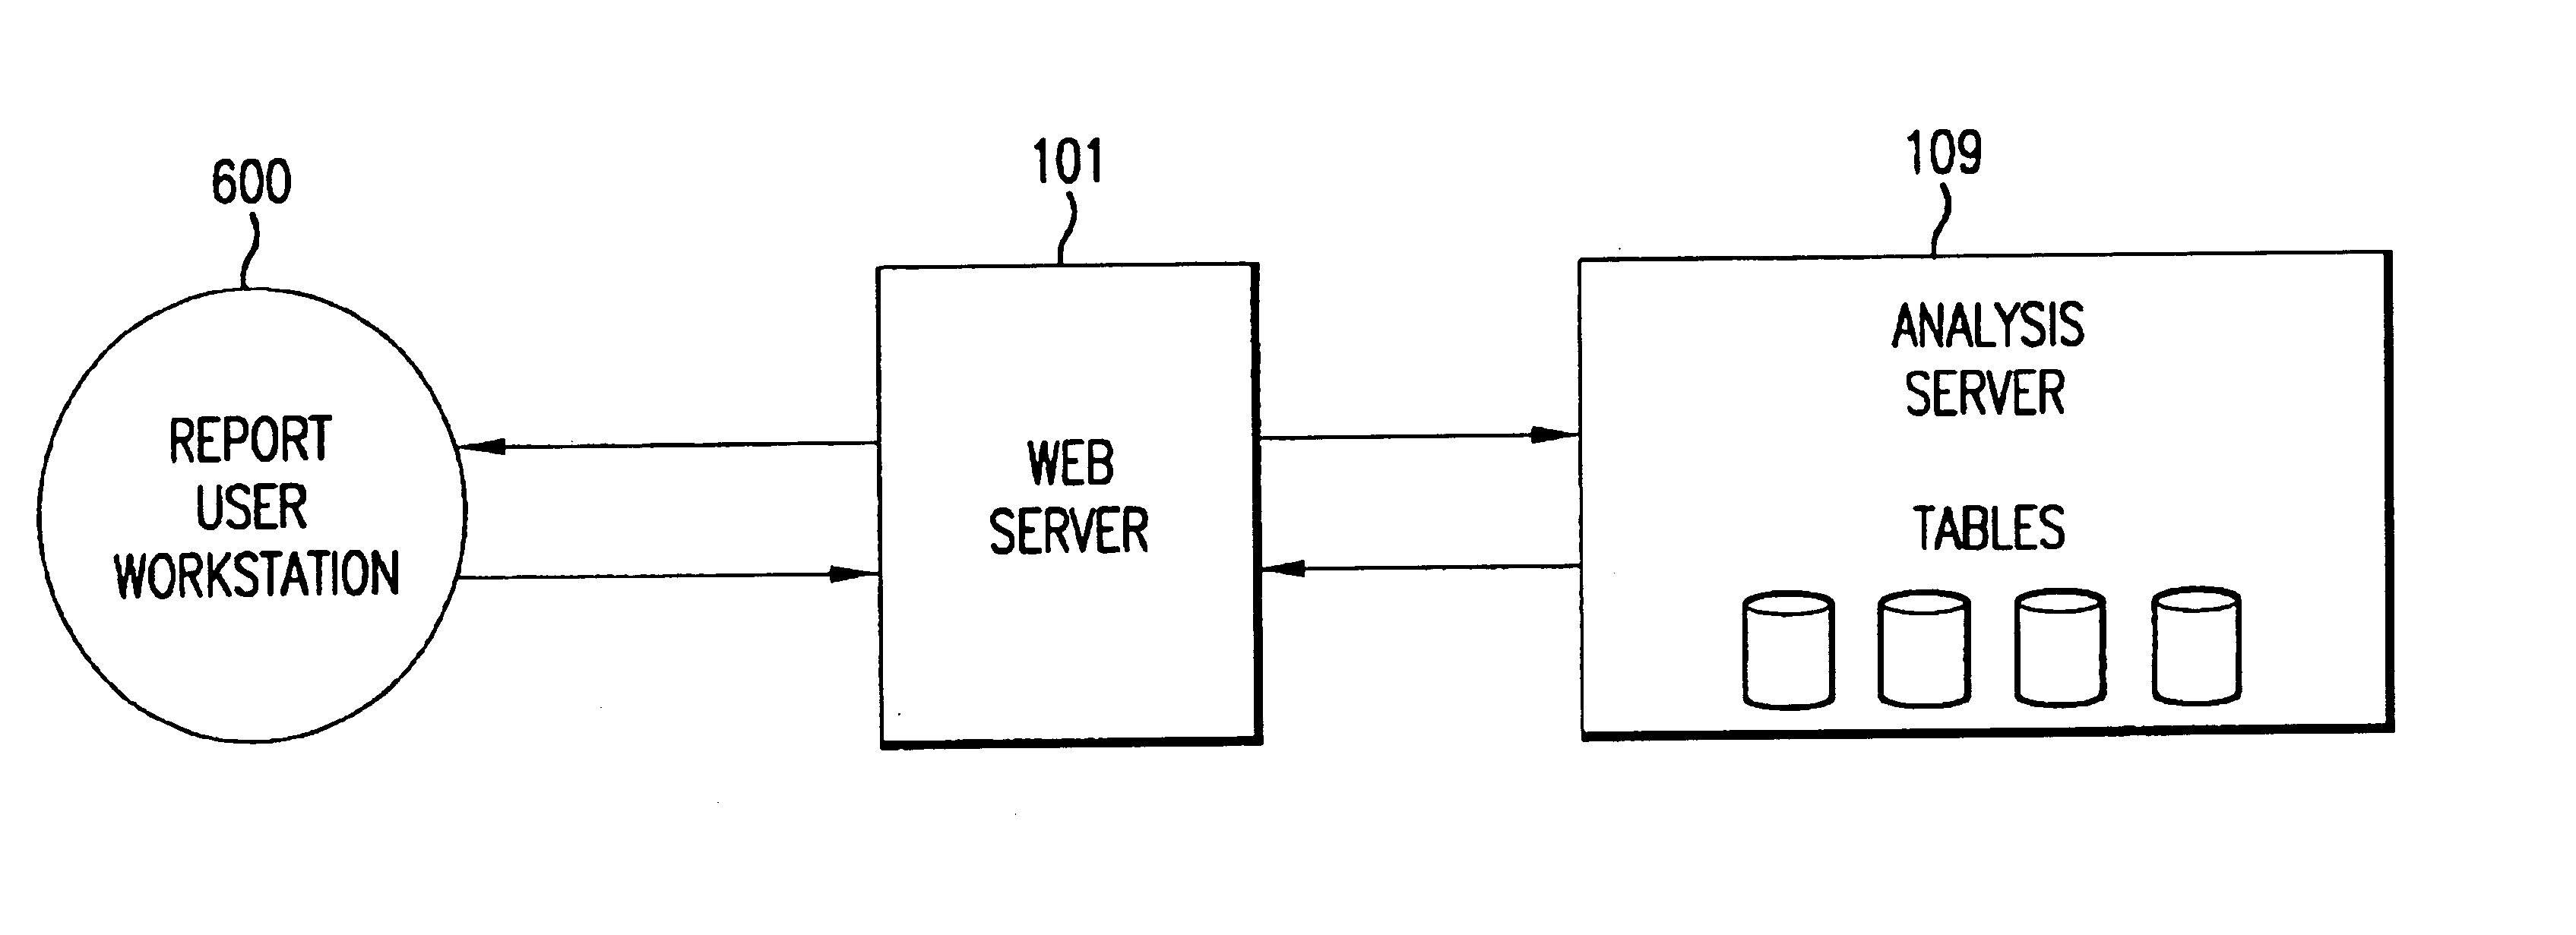 System for collecting, analyzing, and reporting high volume multi-web server usage